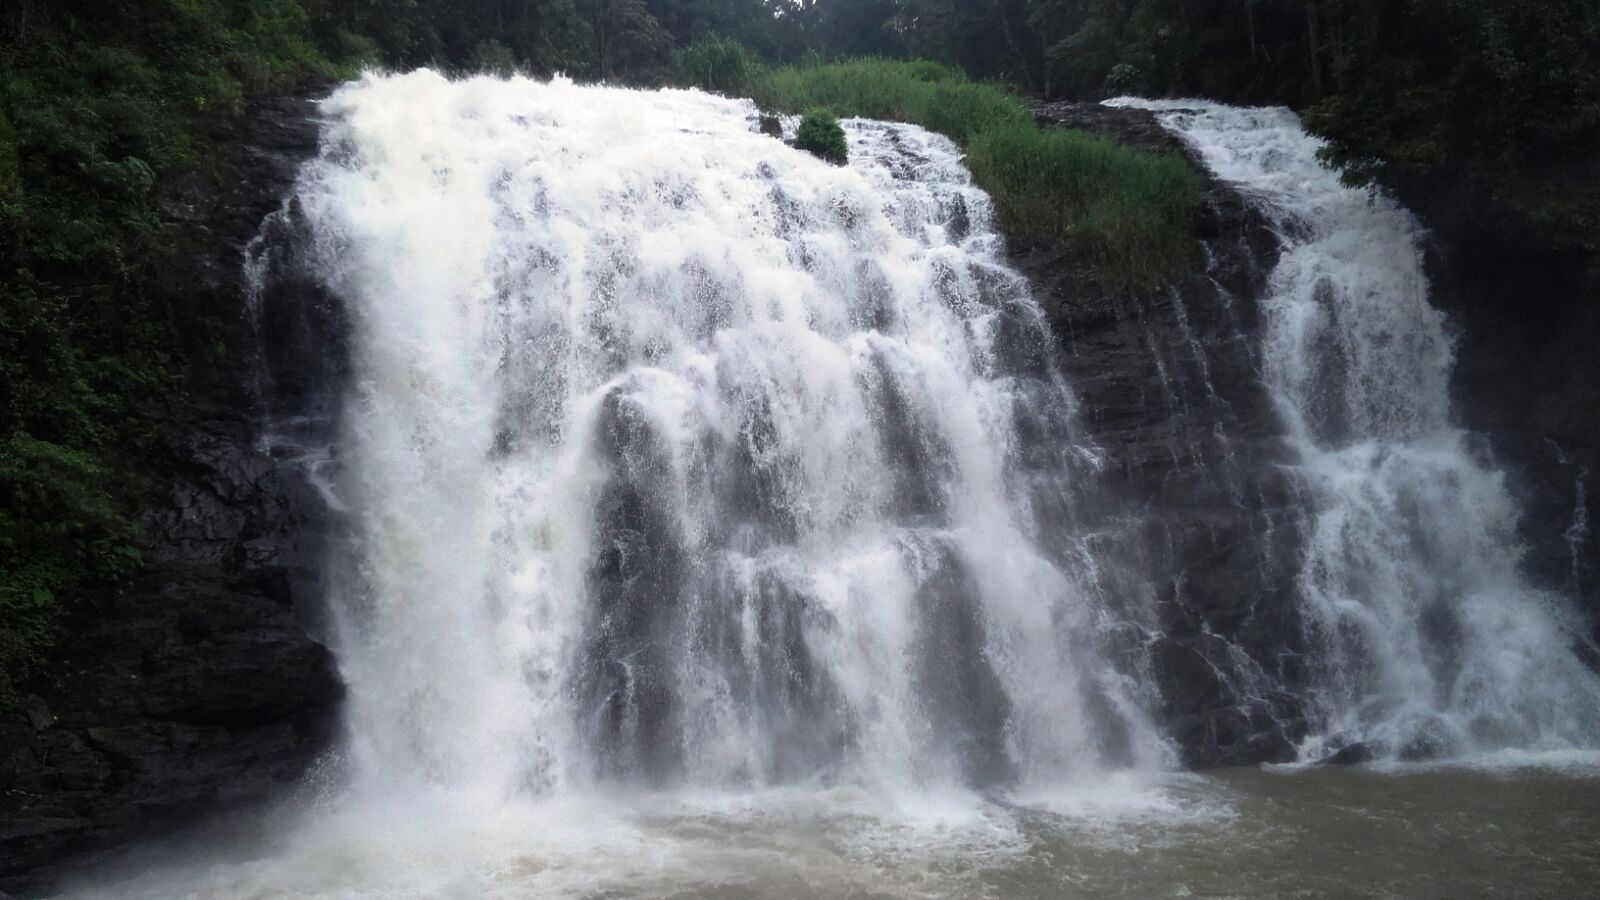 South India waterfall